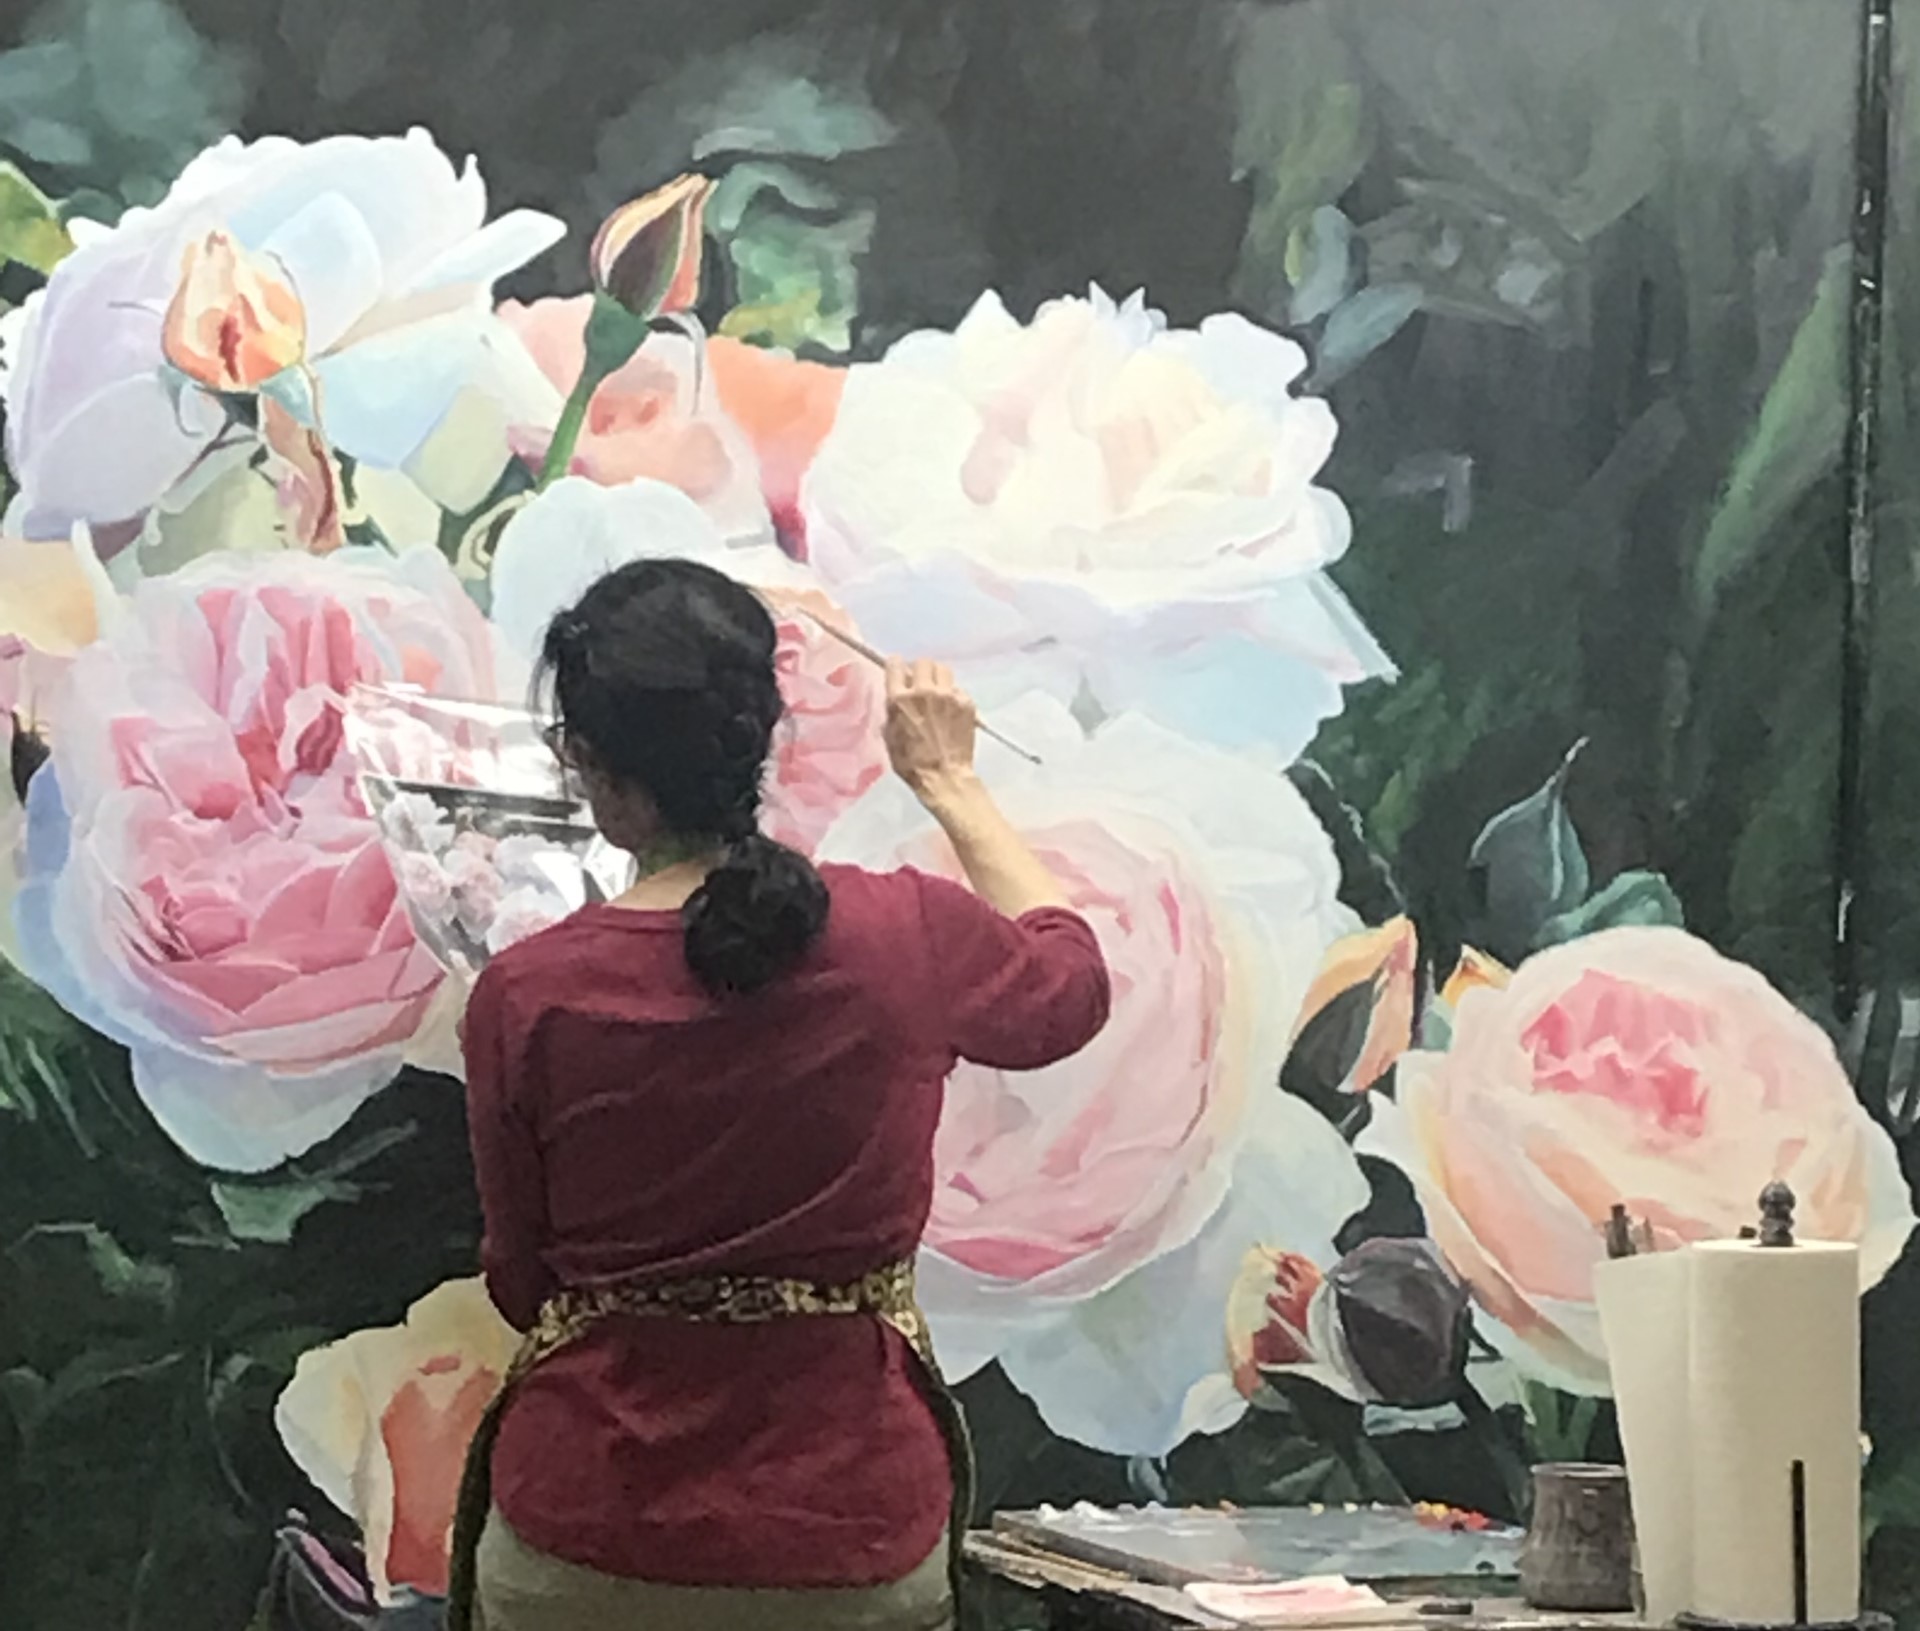 A back view of a woman with dark hair in front of large painting of flowers.